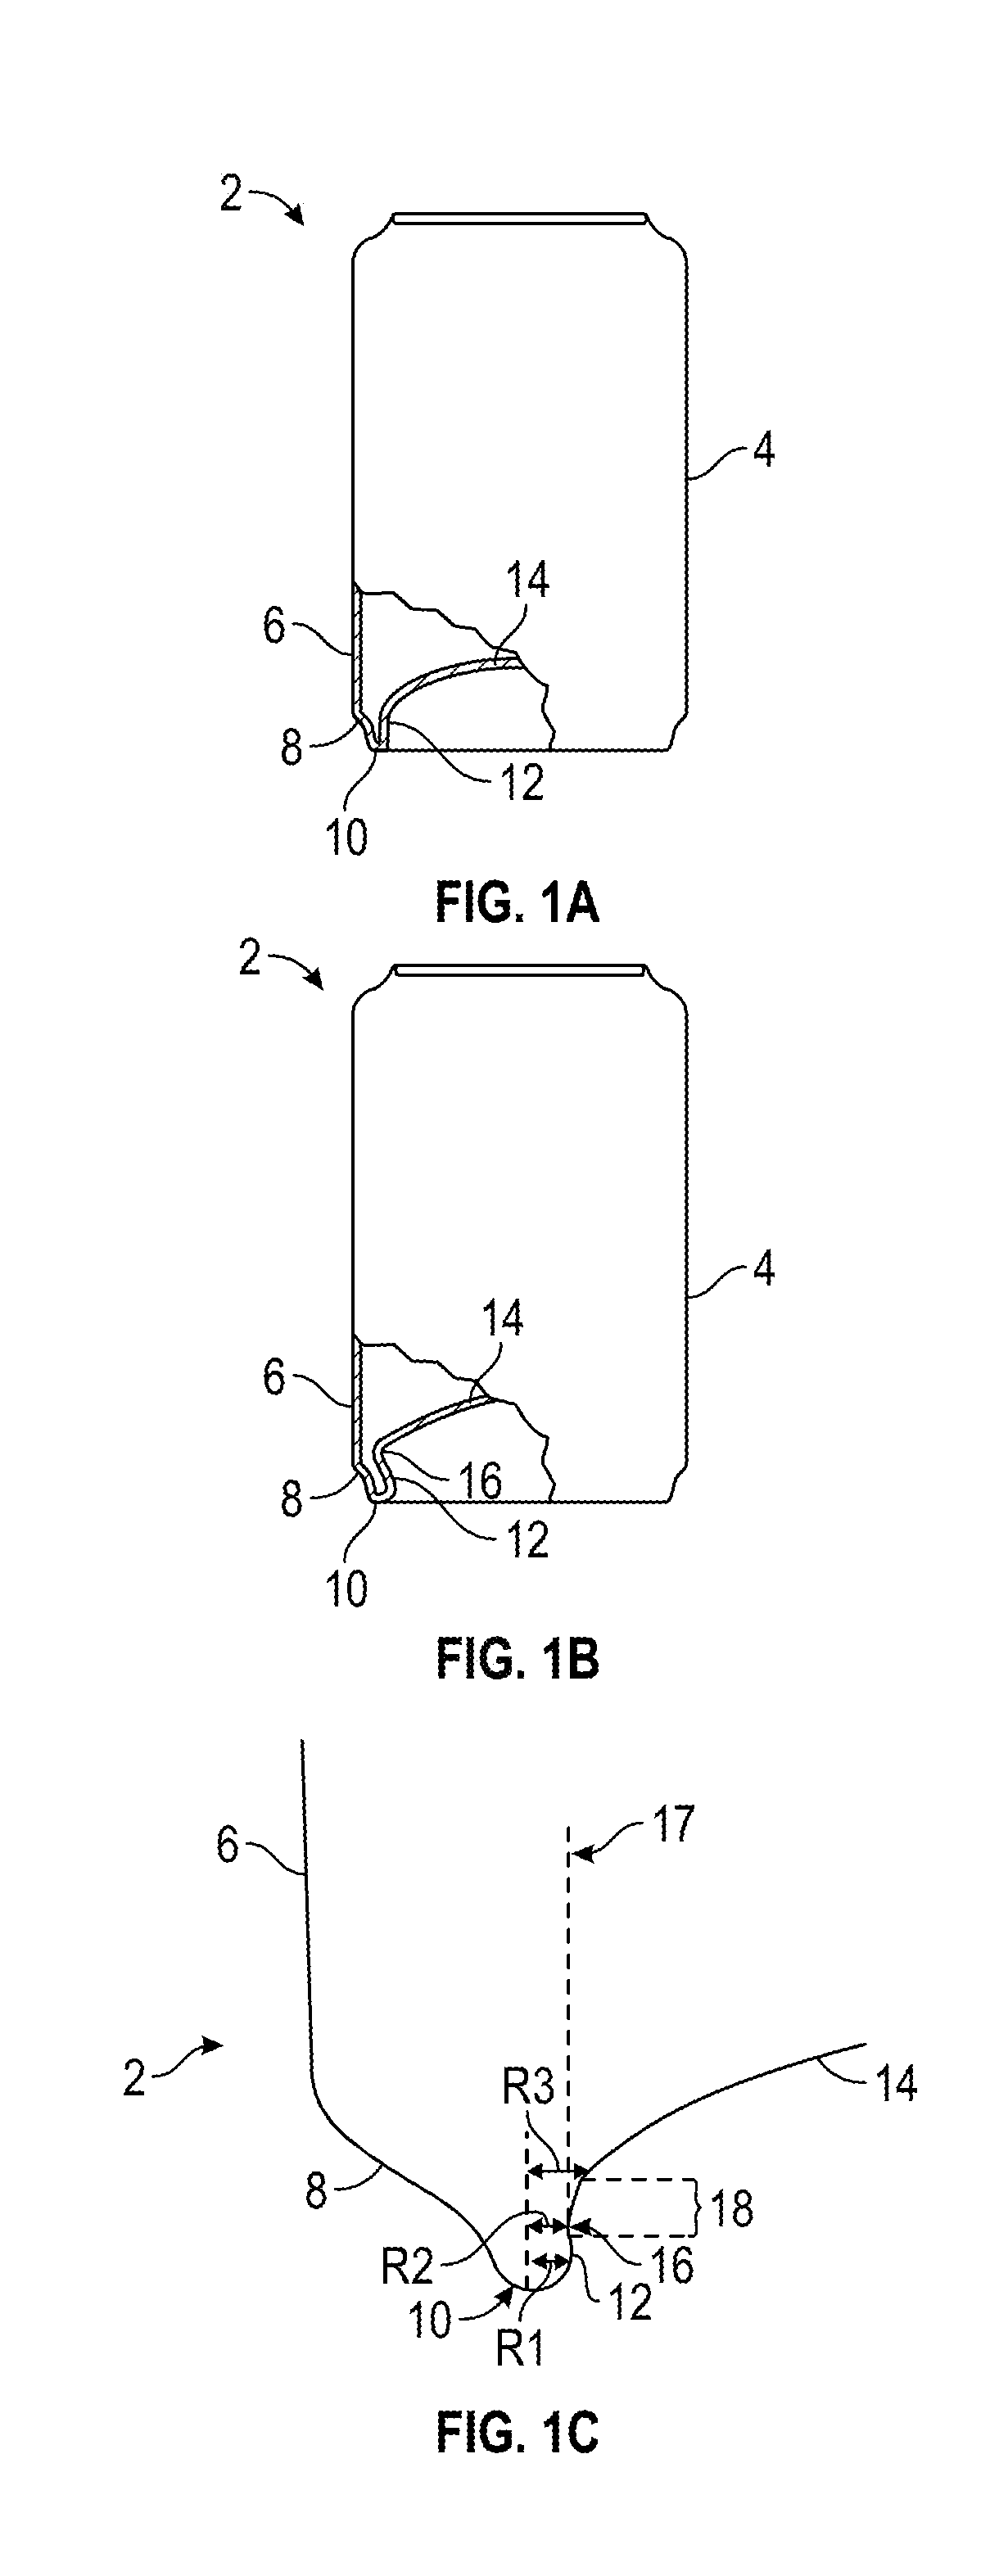 Method and Apparatus for Reforming an Inside Dome Wall Portion of a Container